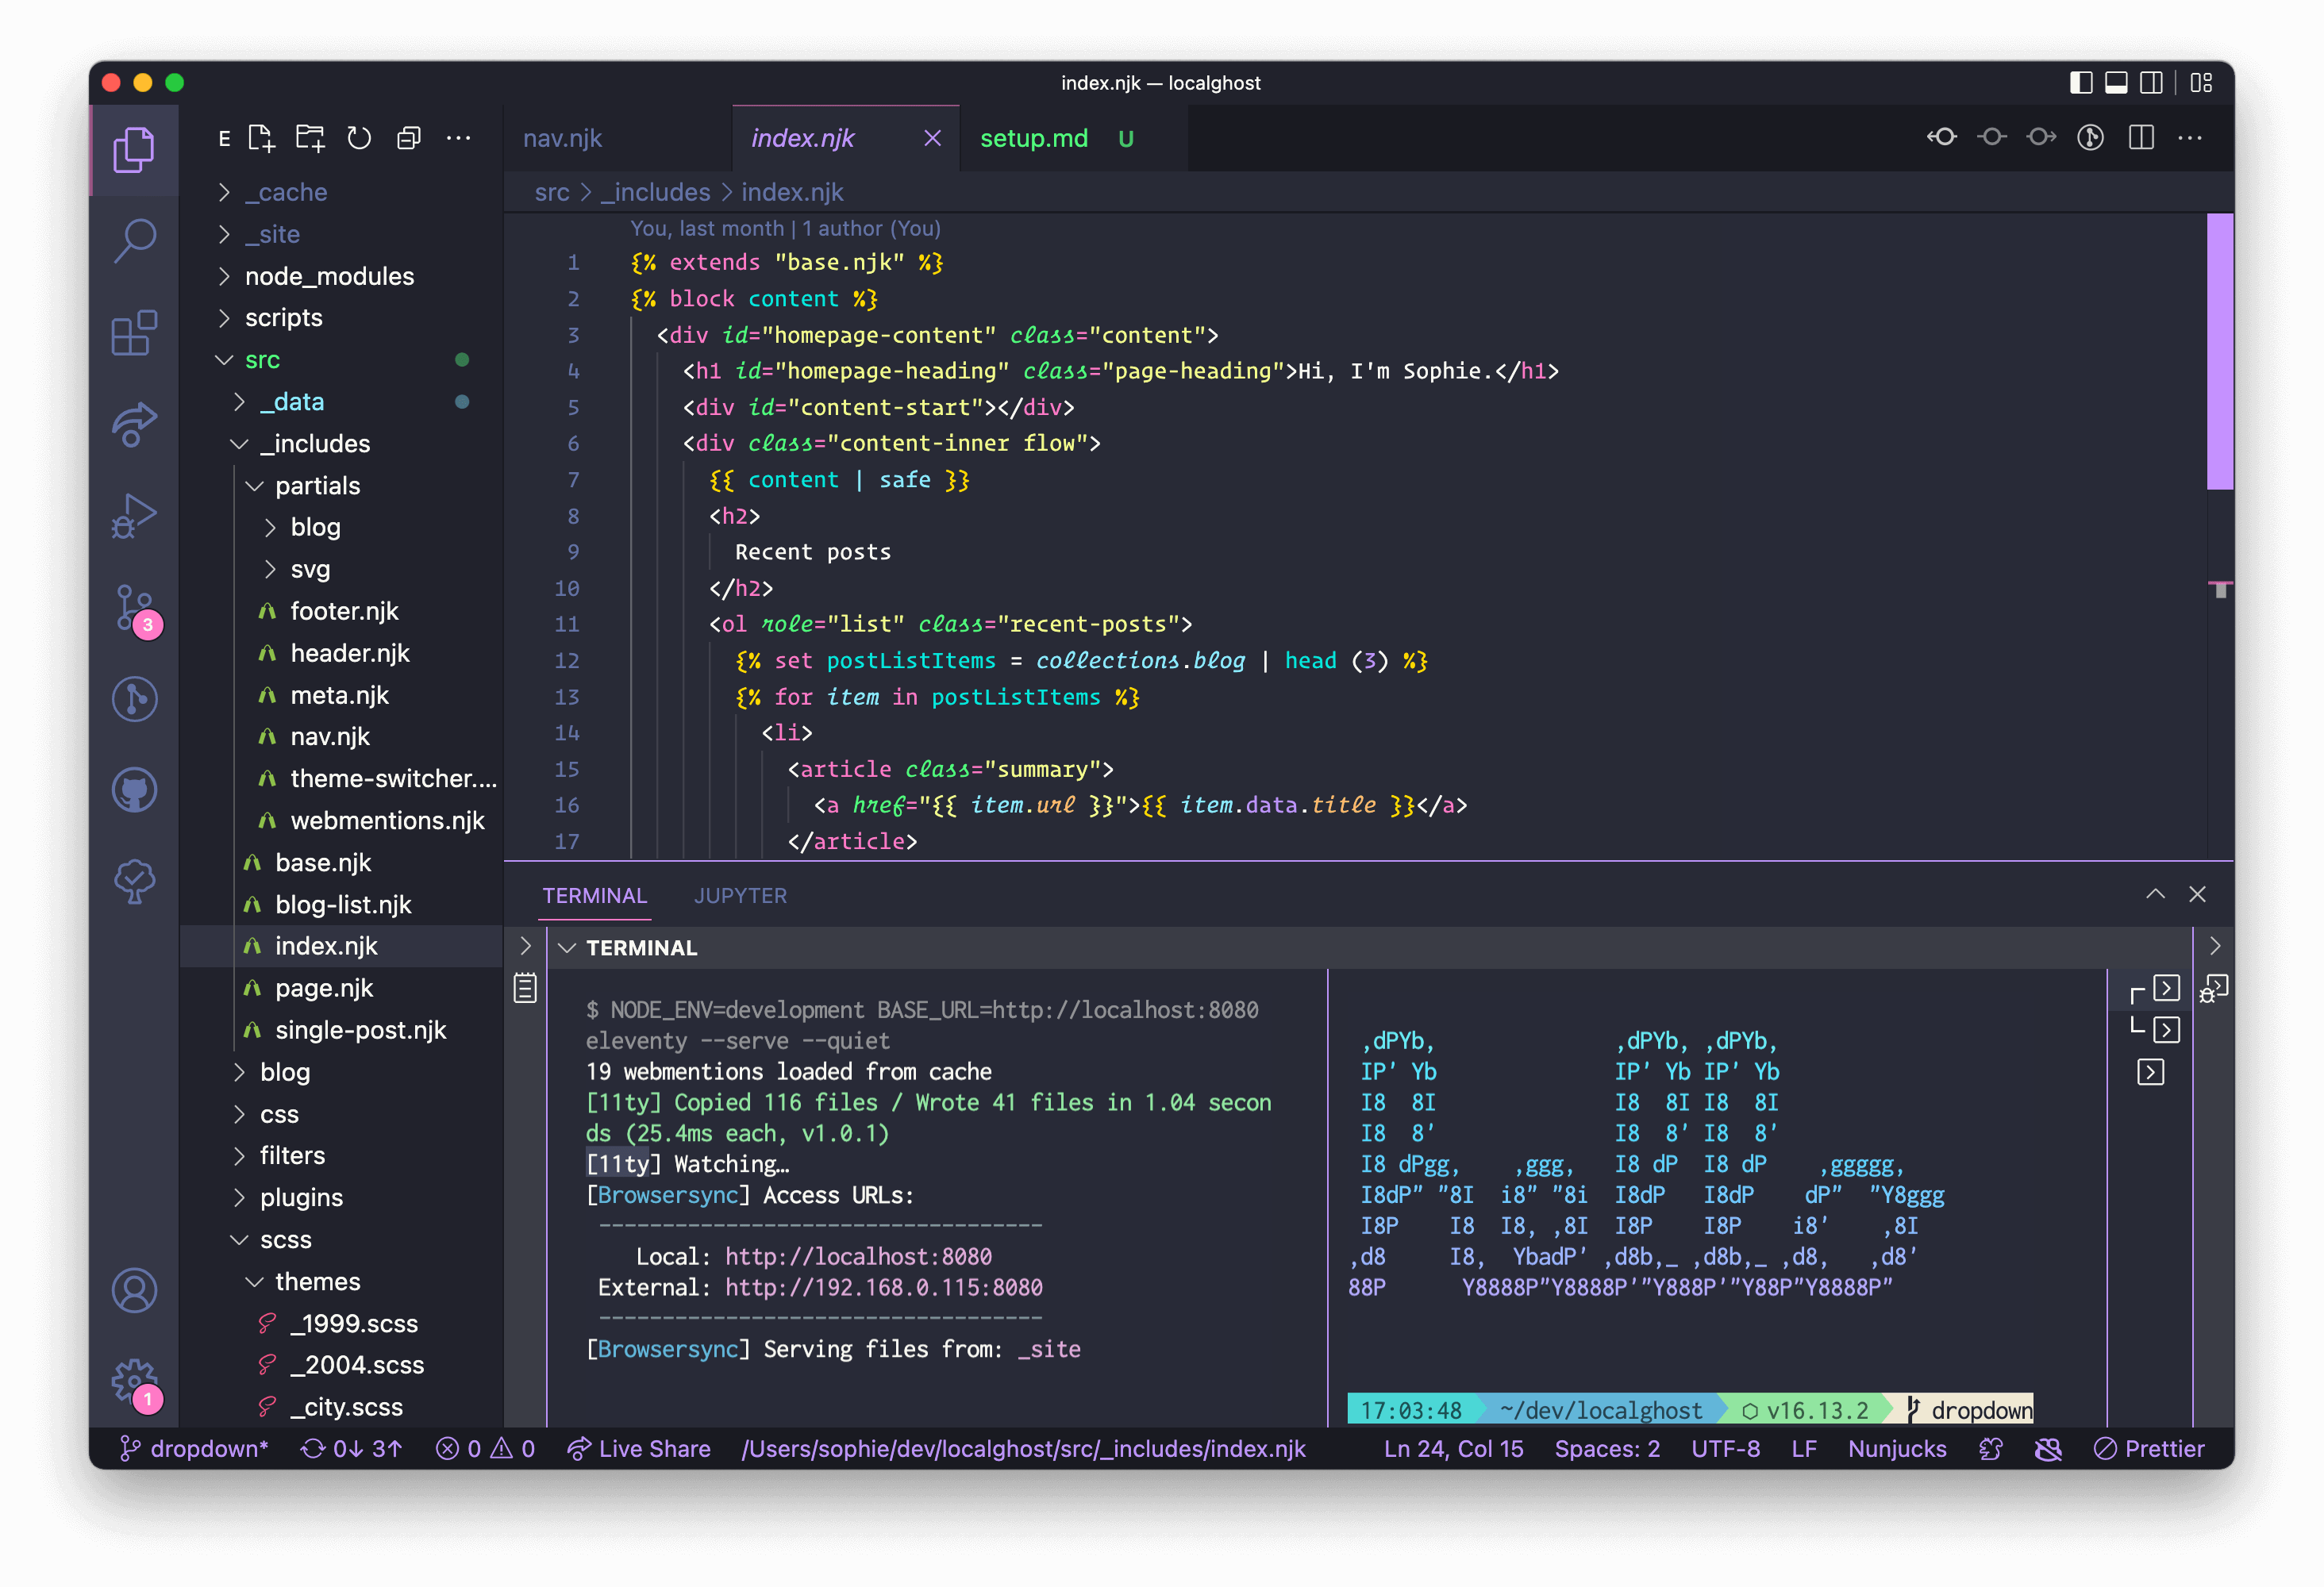 A VSCode window with the source code for this website. I have two embeded terminals open at the bottom; the left-hand one has the Eleventy compiler running, and the right-hand one is just a command prompt with "hello" written in cursive out of ASCII chars. The background colour is navy blue, with pastel-coloured variables and keywords.